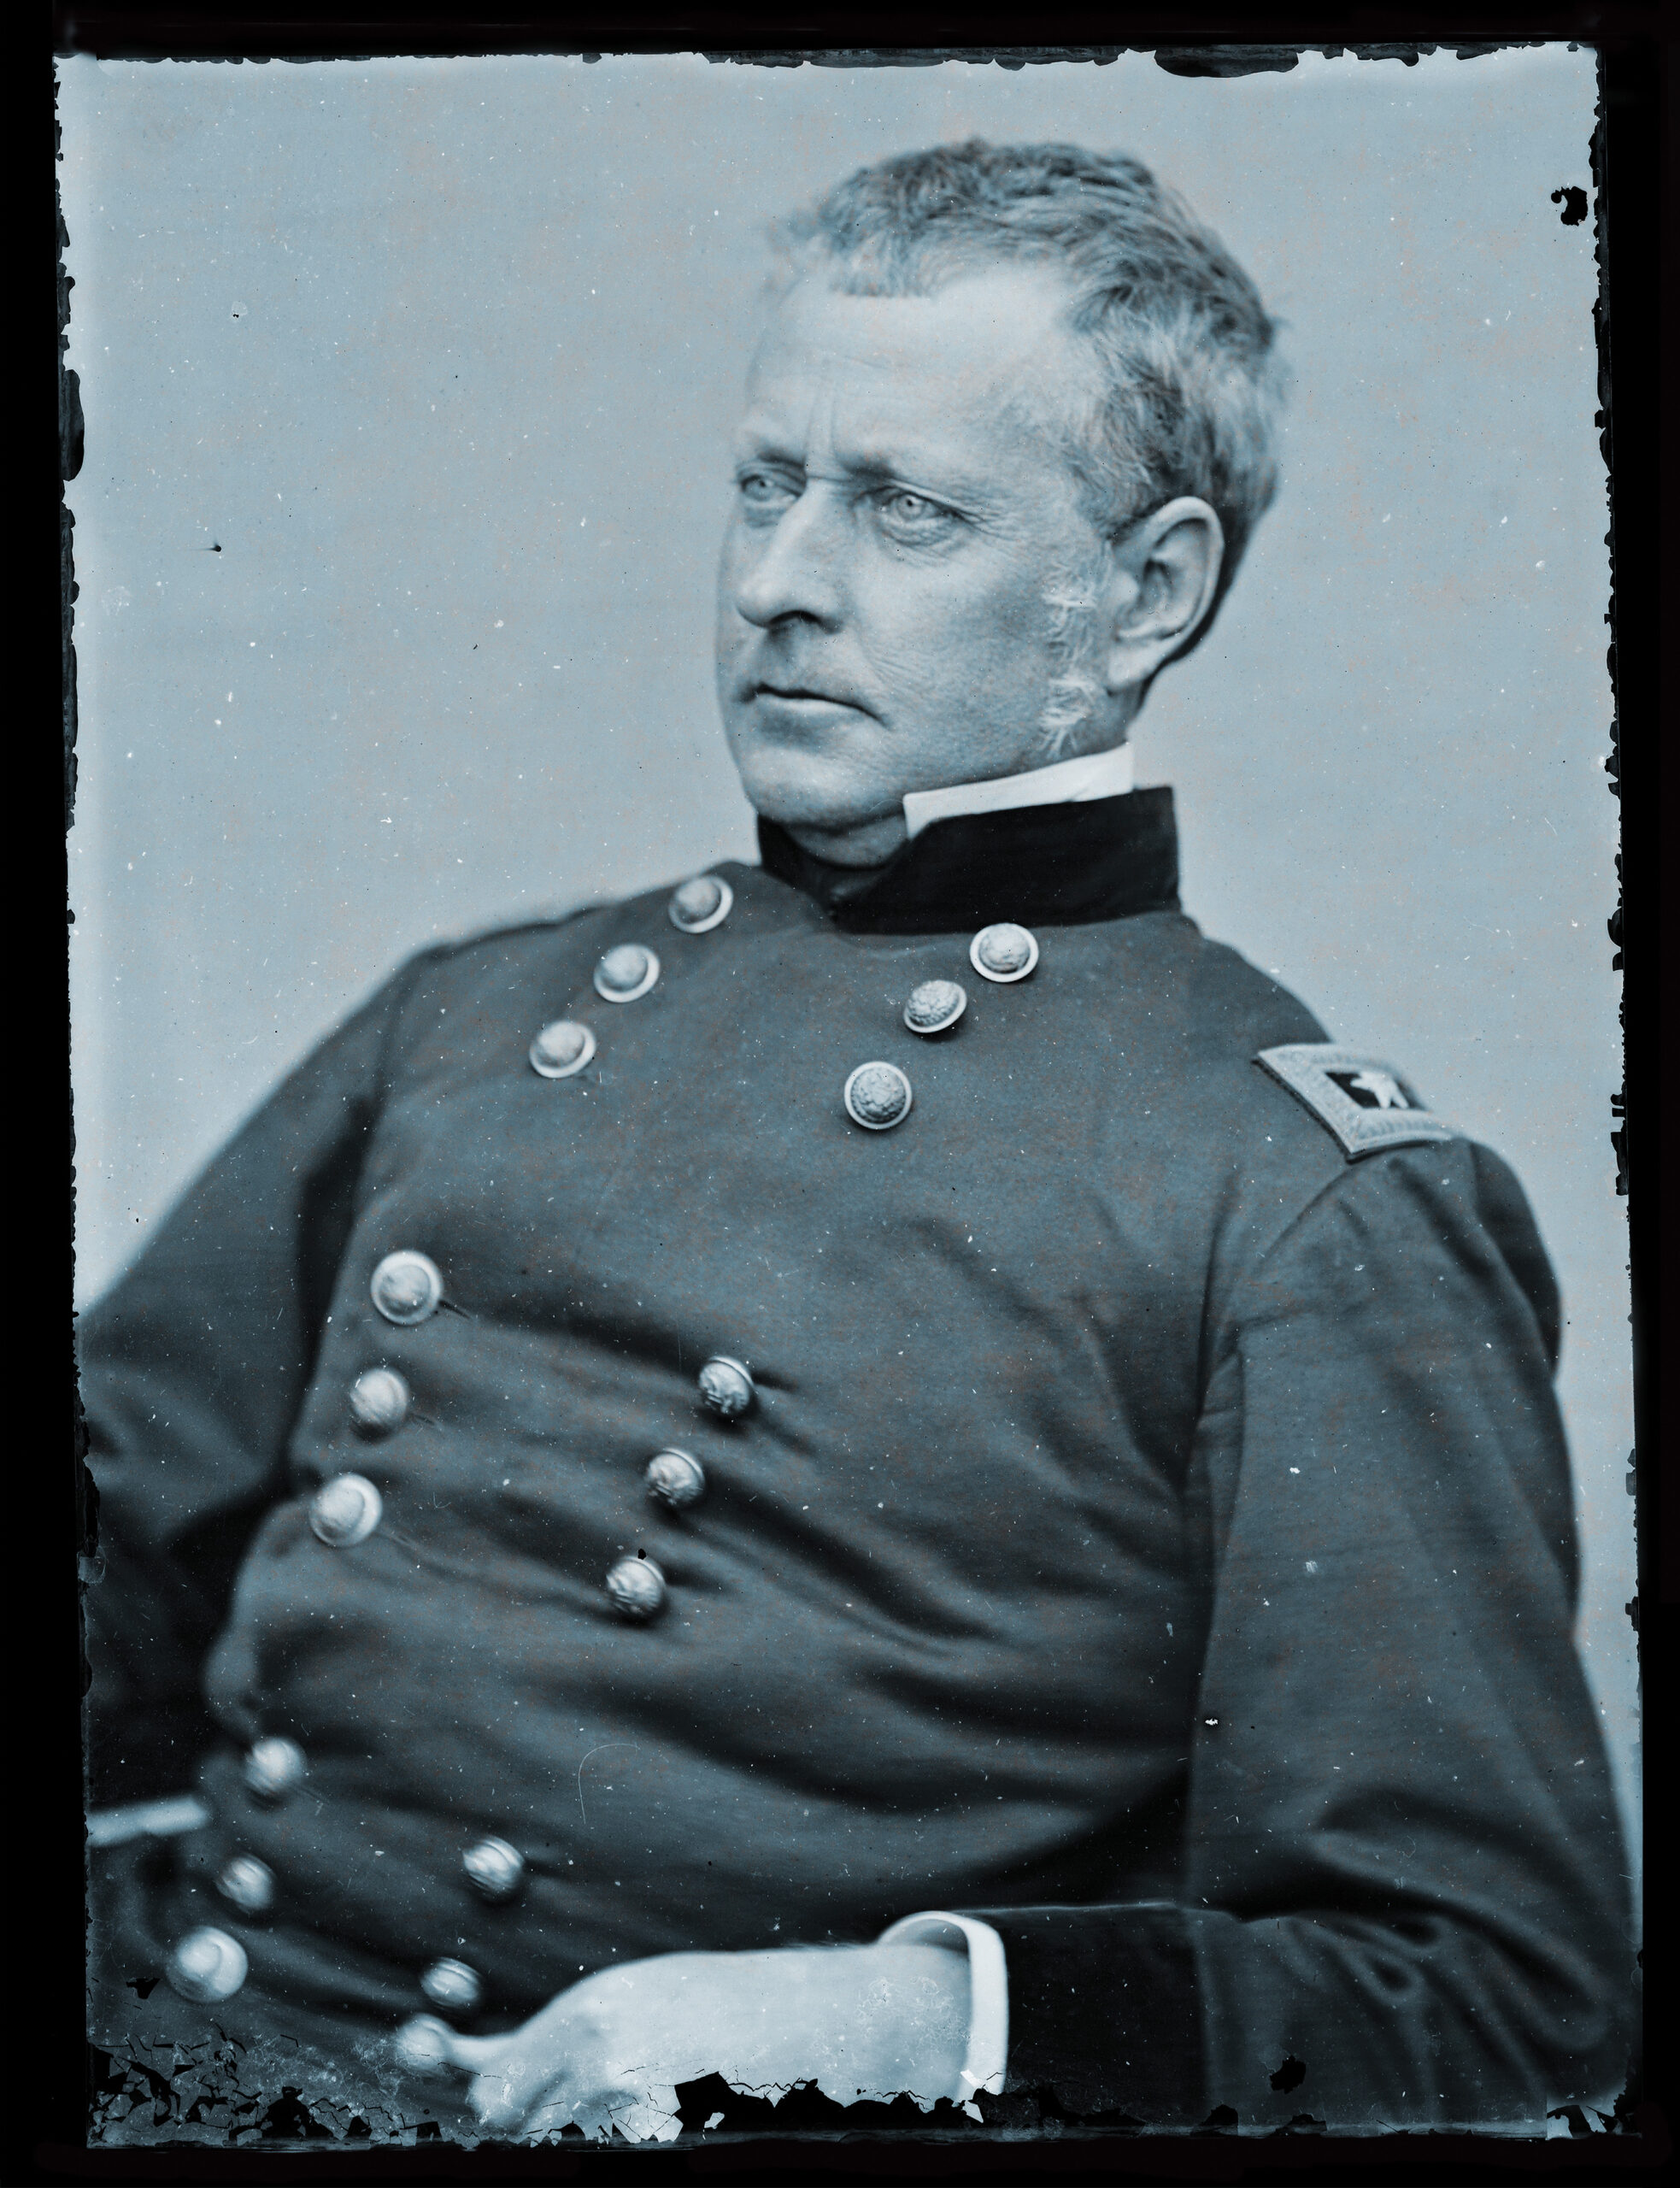 “FIGHTING JOE” HOOKER LITERALLY CLEANED UP THE ARMY OF THE POTOMAC DURING THE CIVIL WAR